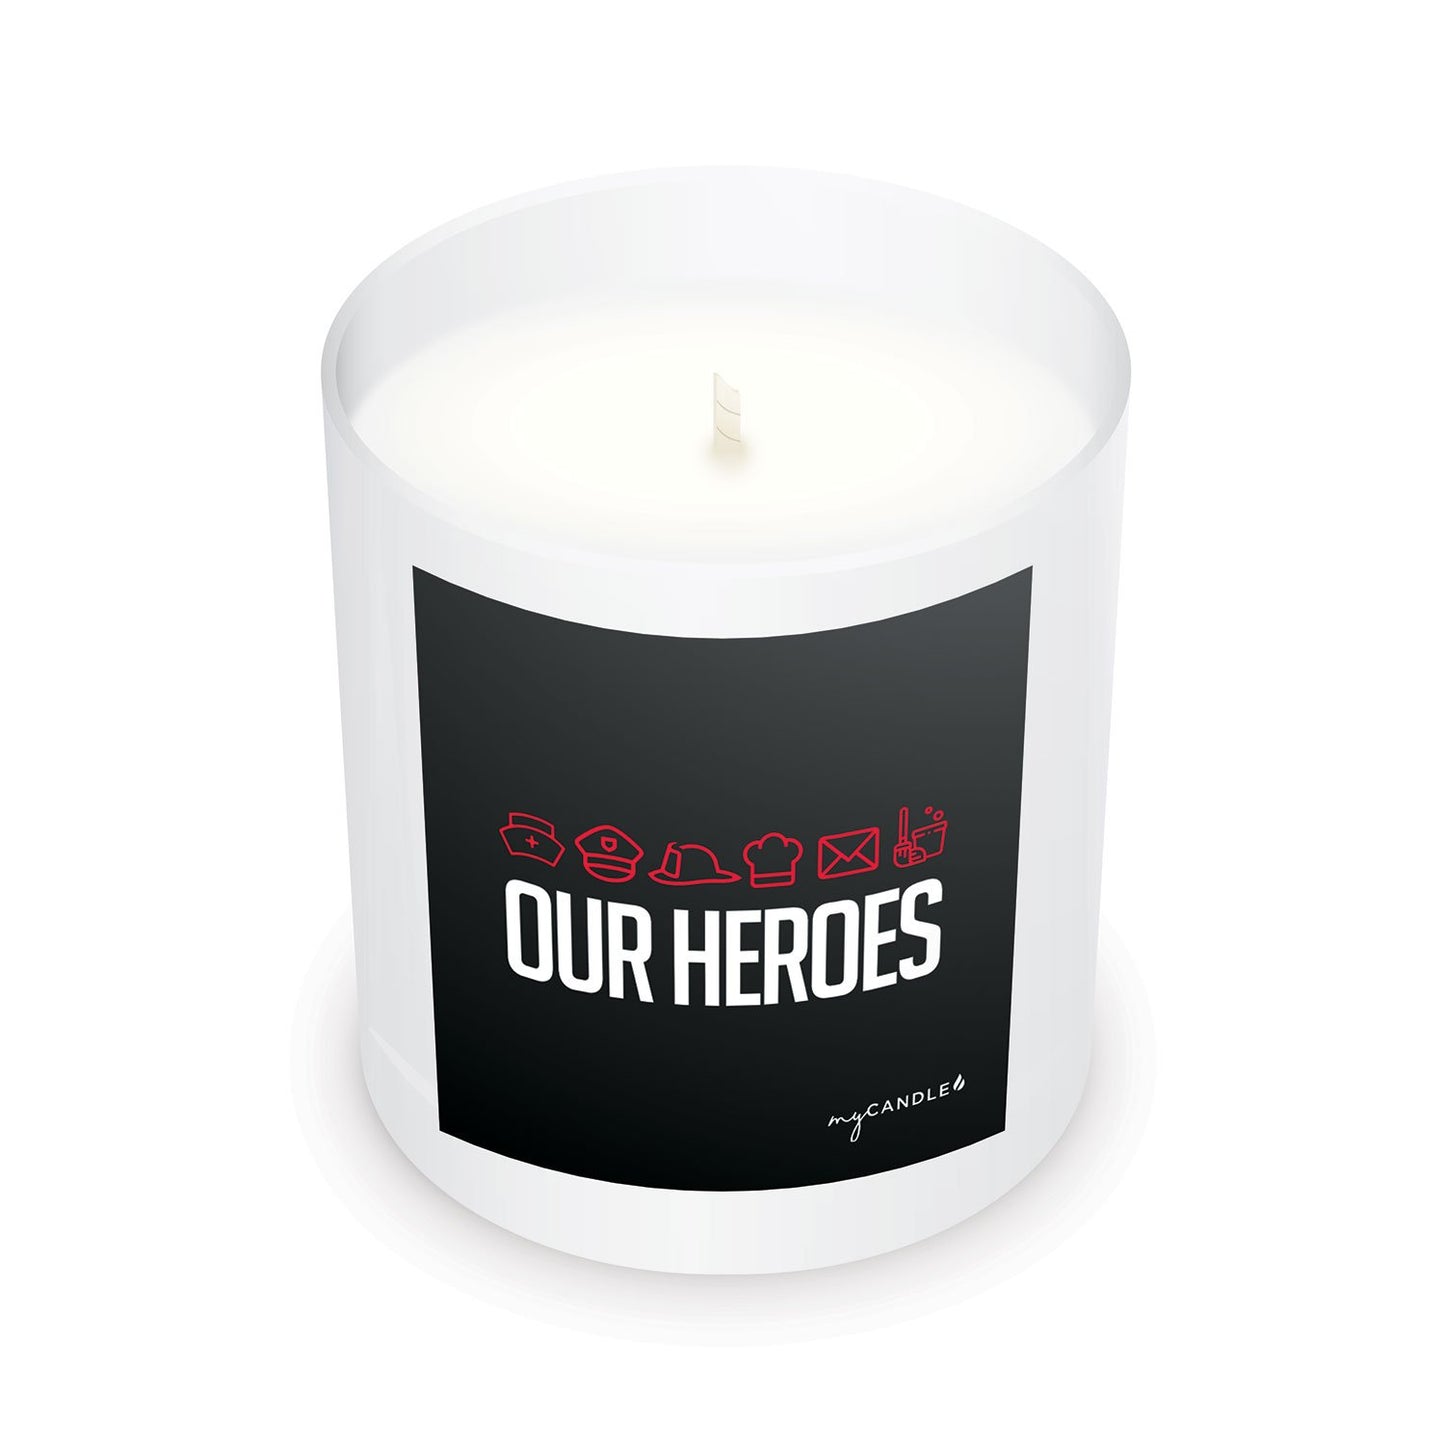 Our Heroes Candle